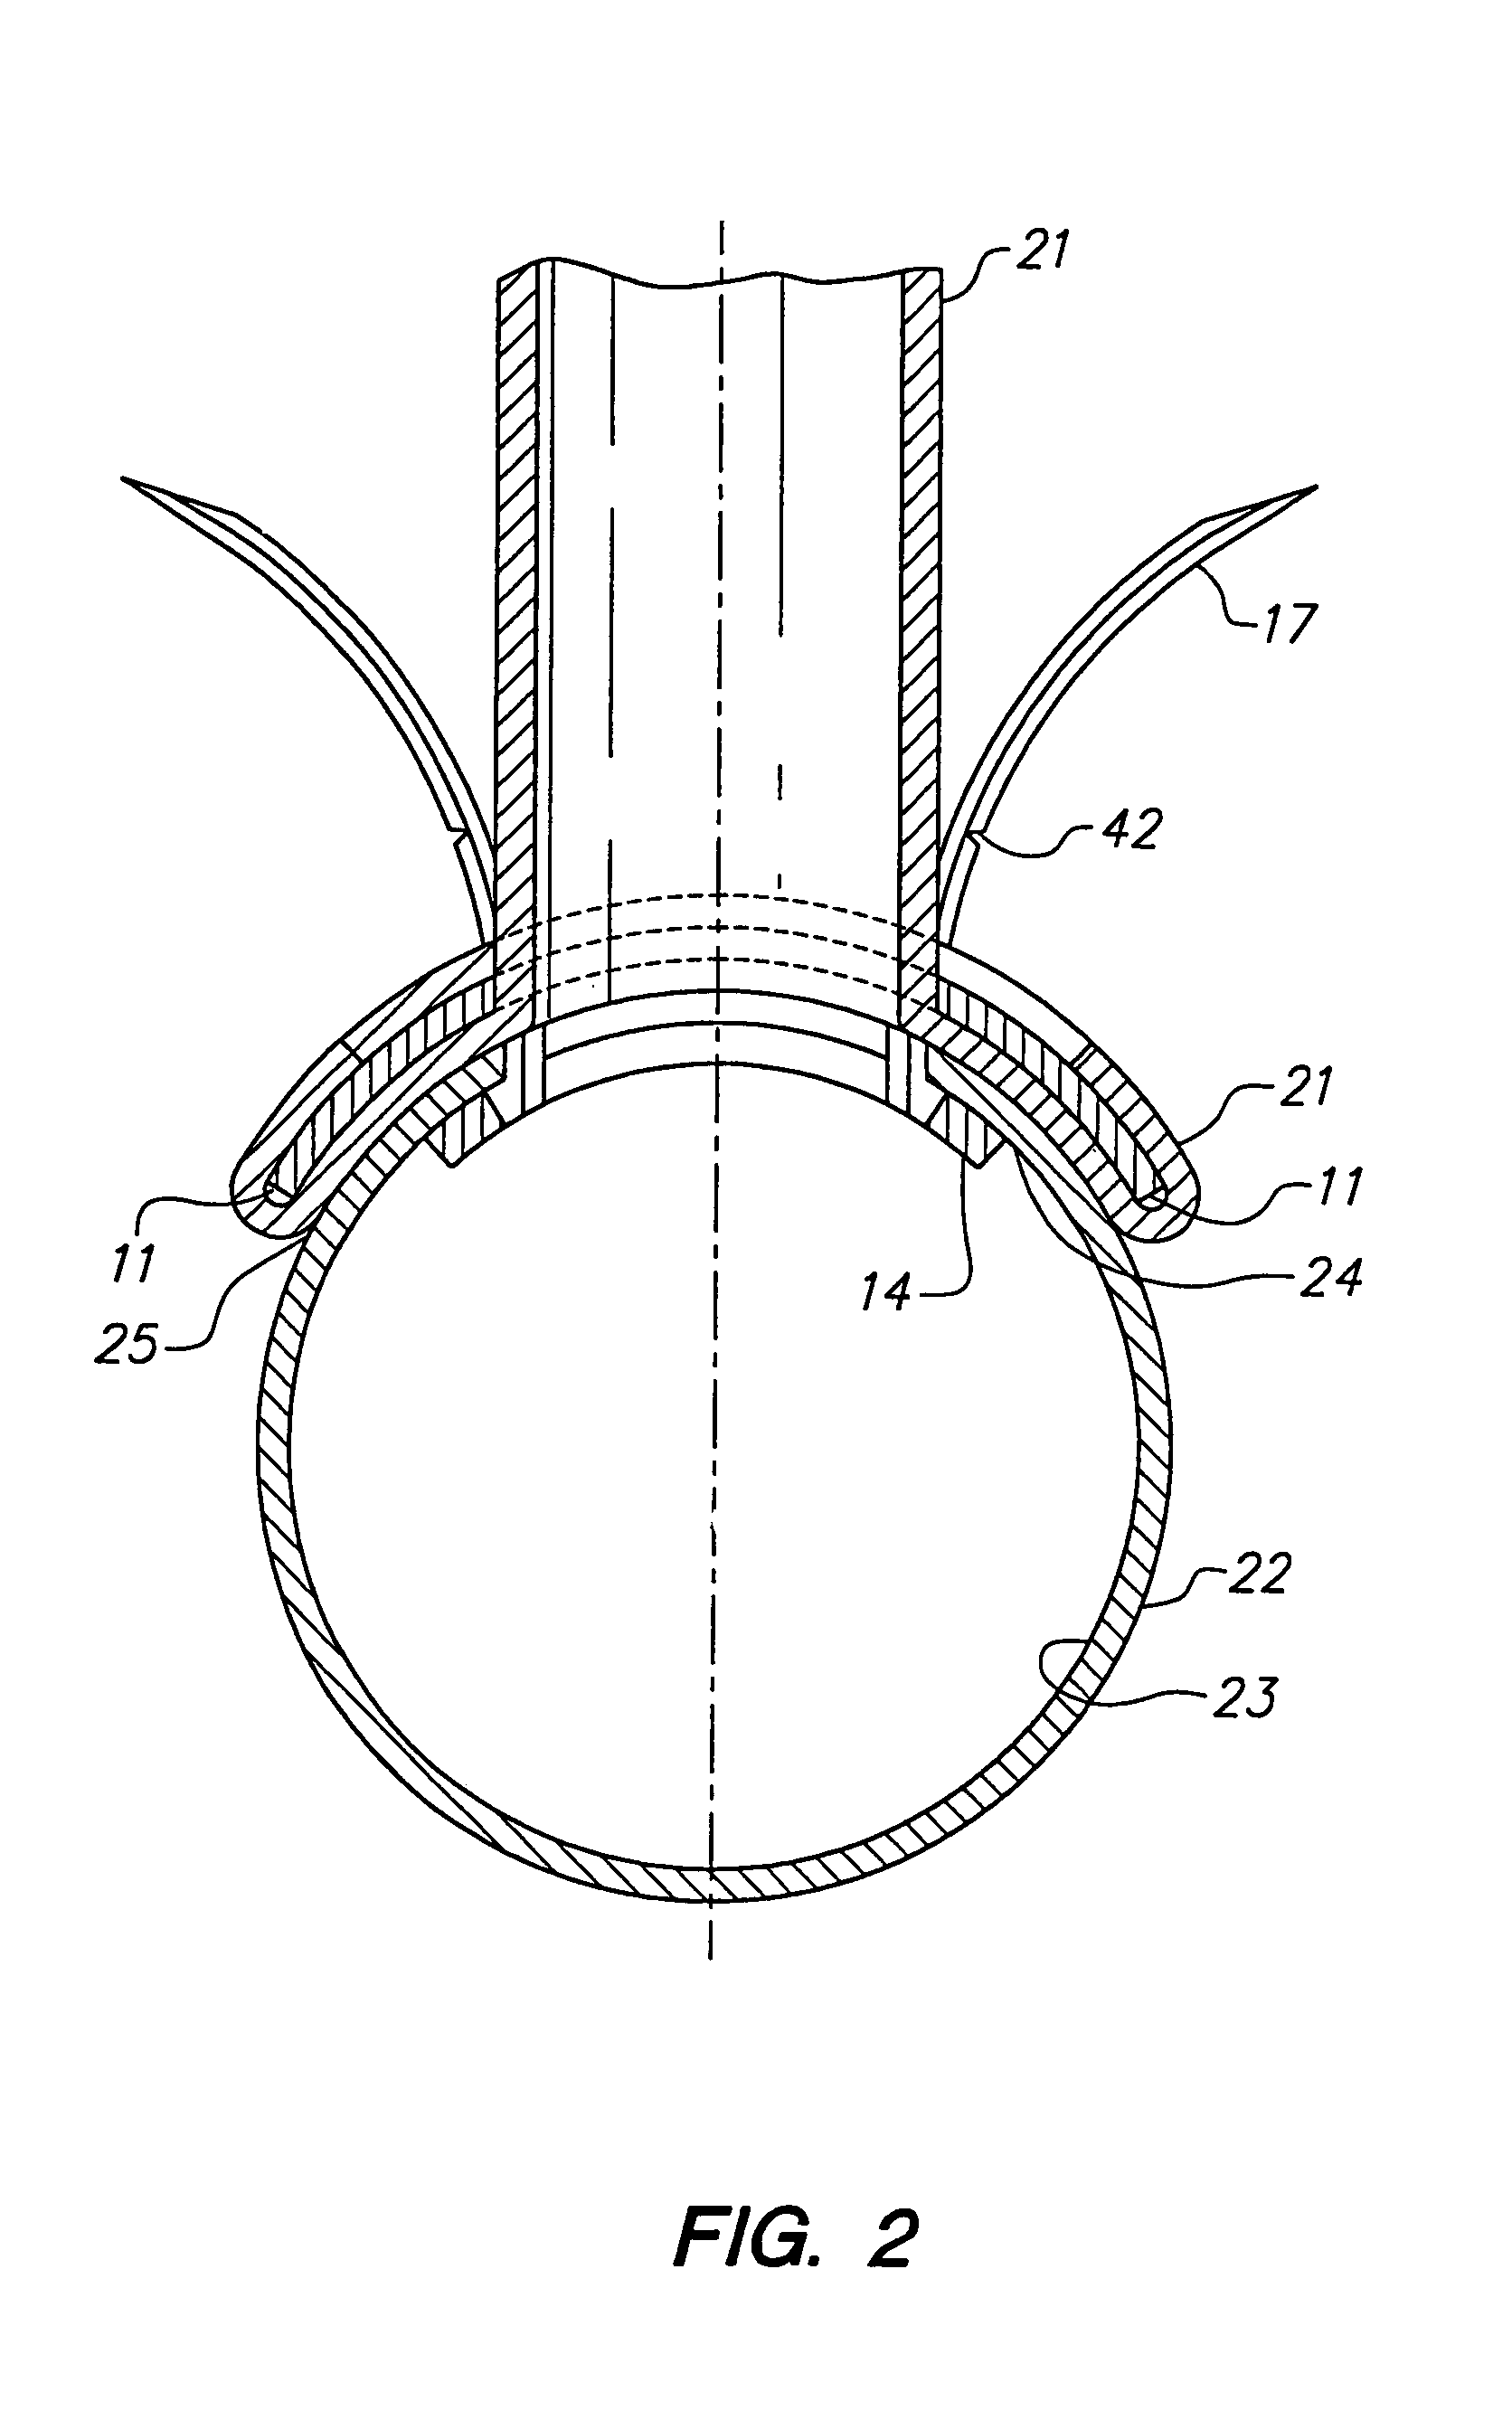 Method and system for attaching a graft to a blood vessel